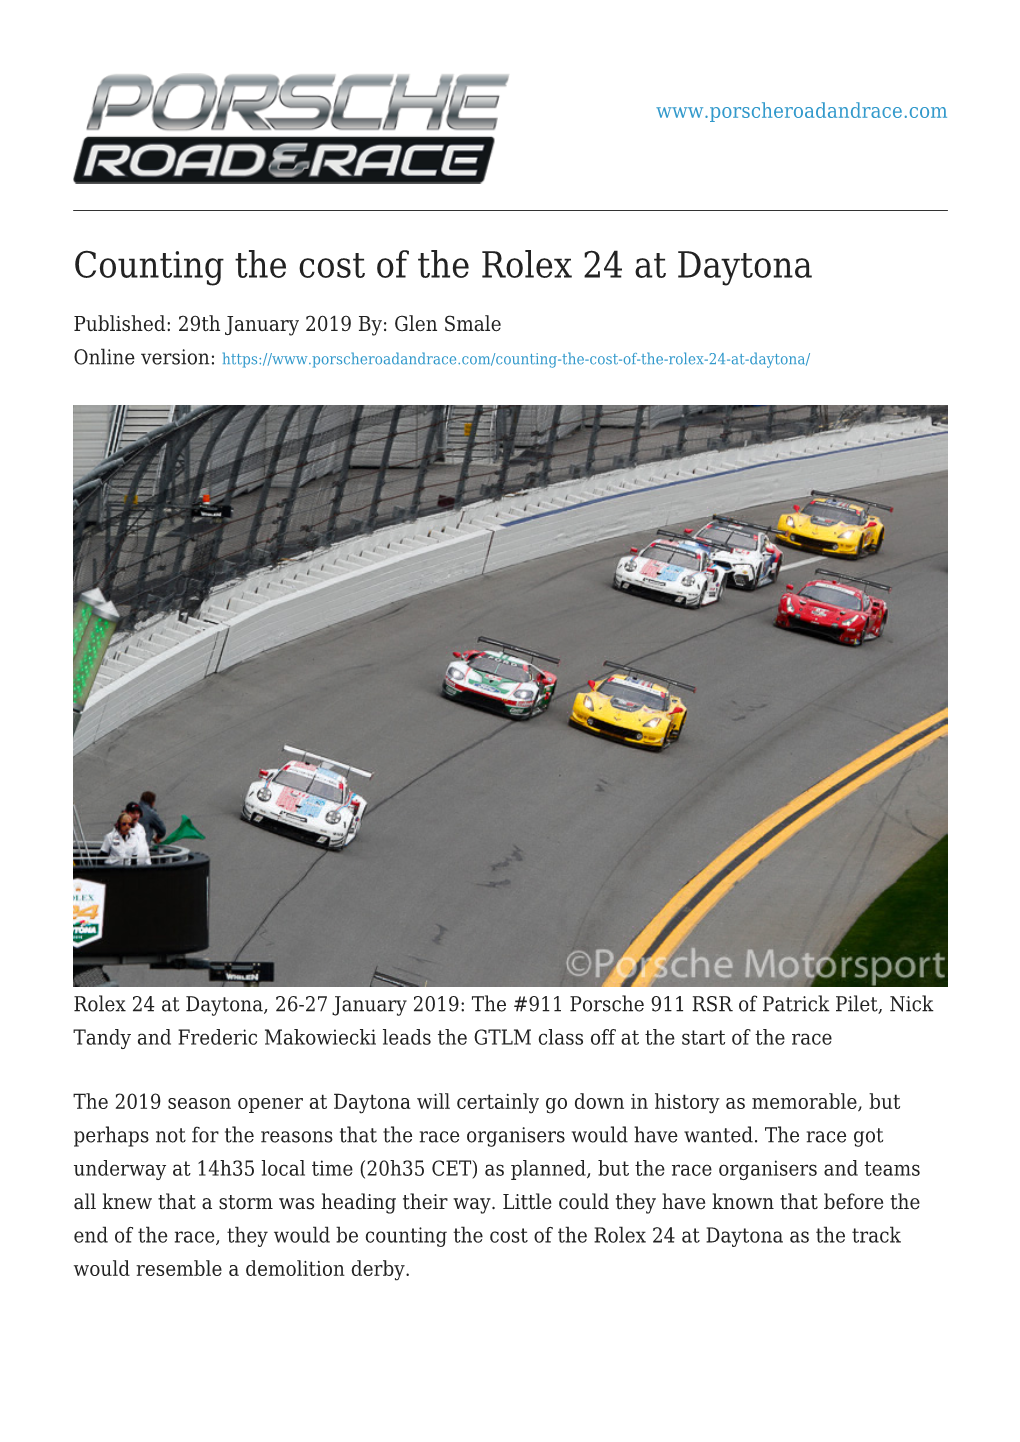 Counting the Cost of the Rolex 24 at Daytona